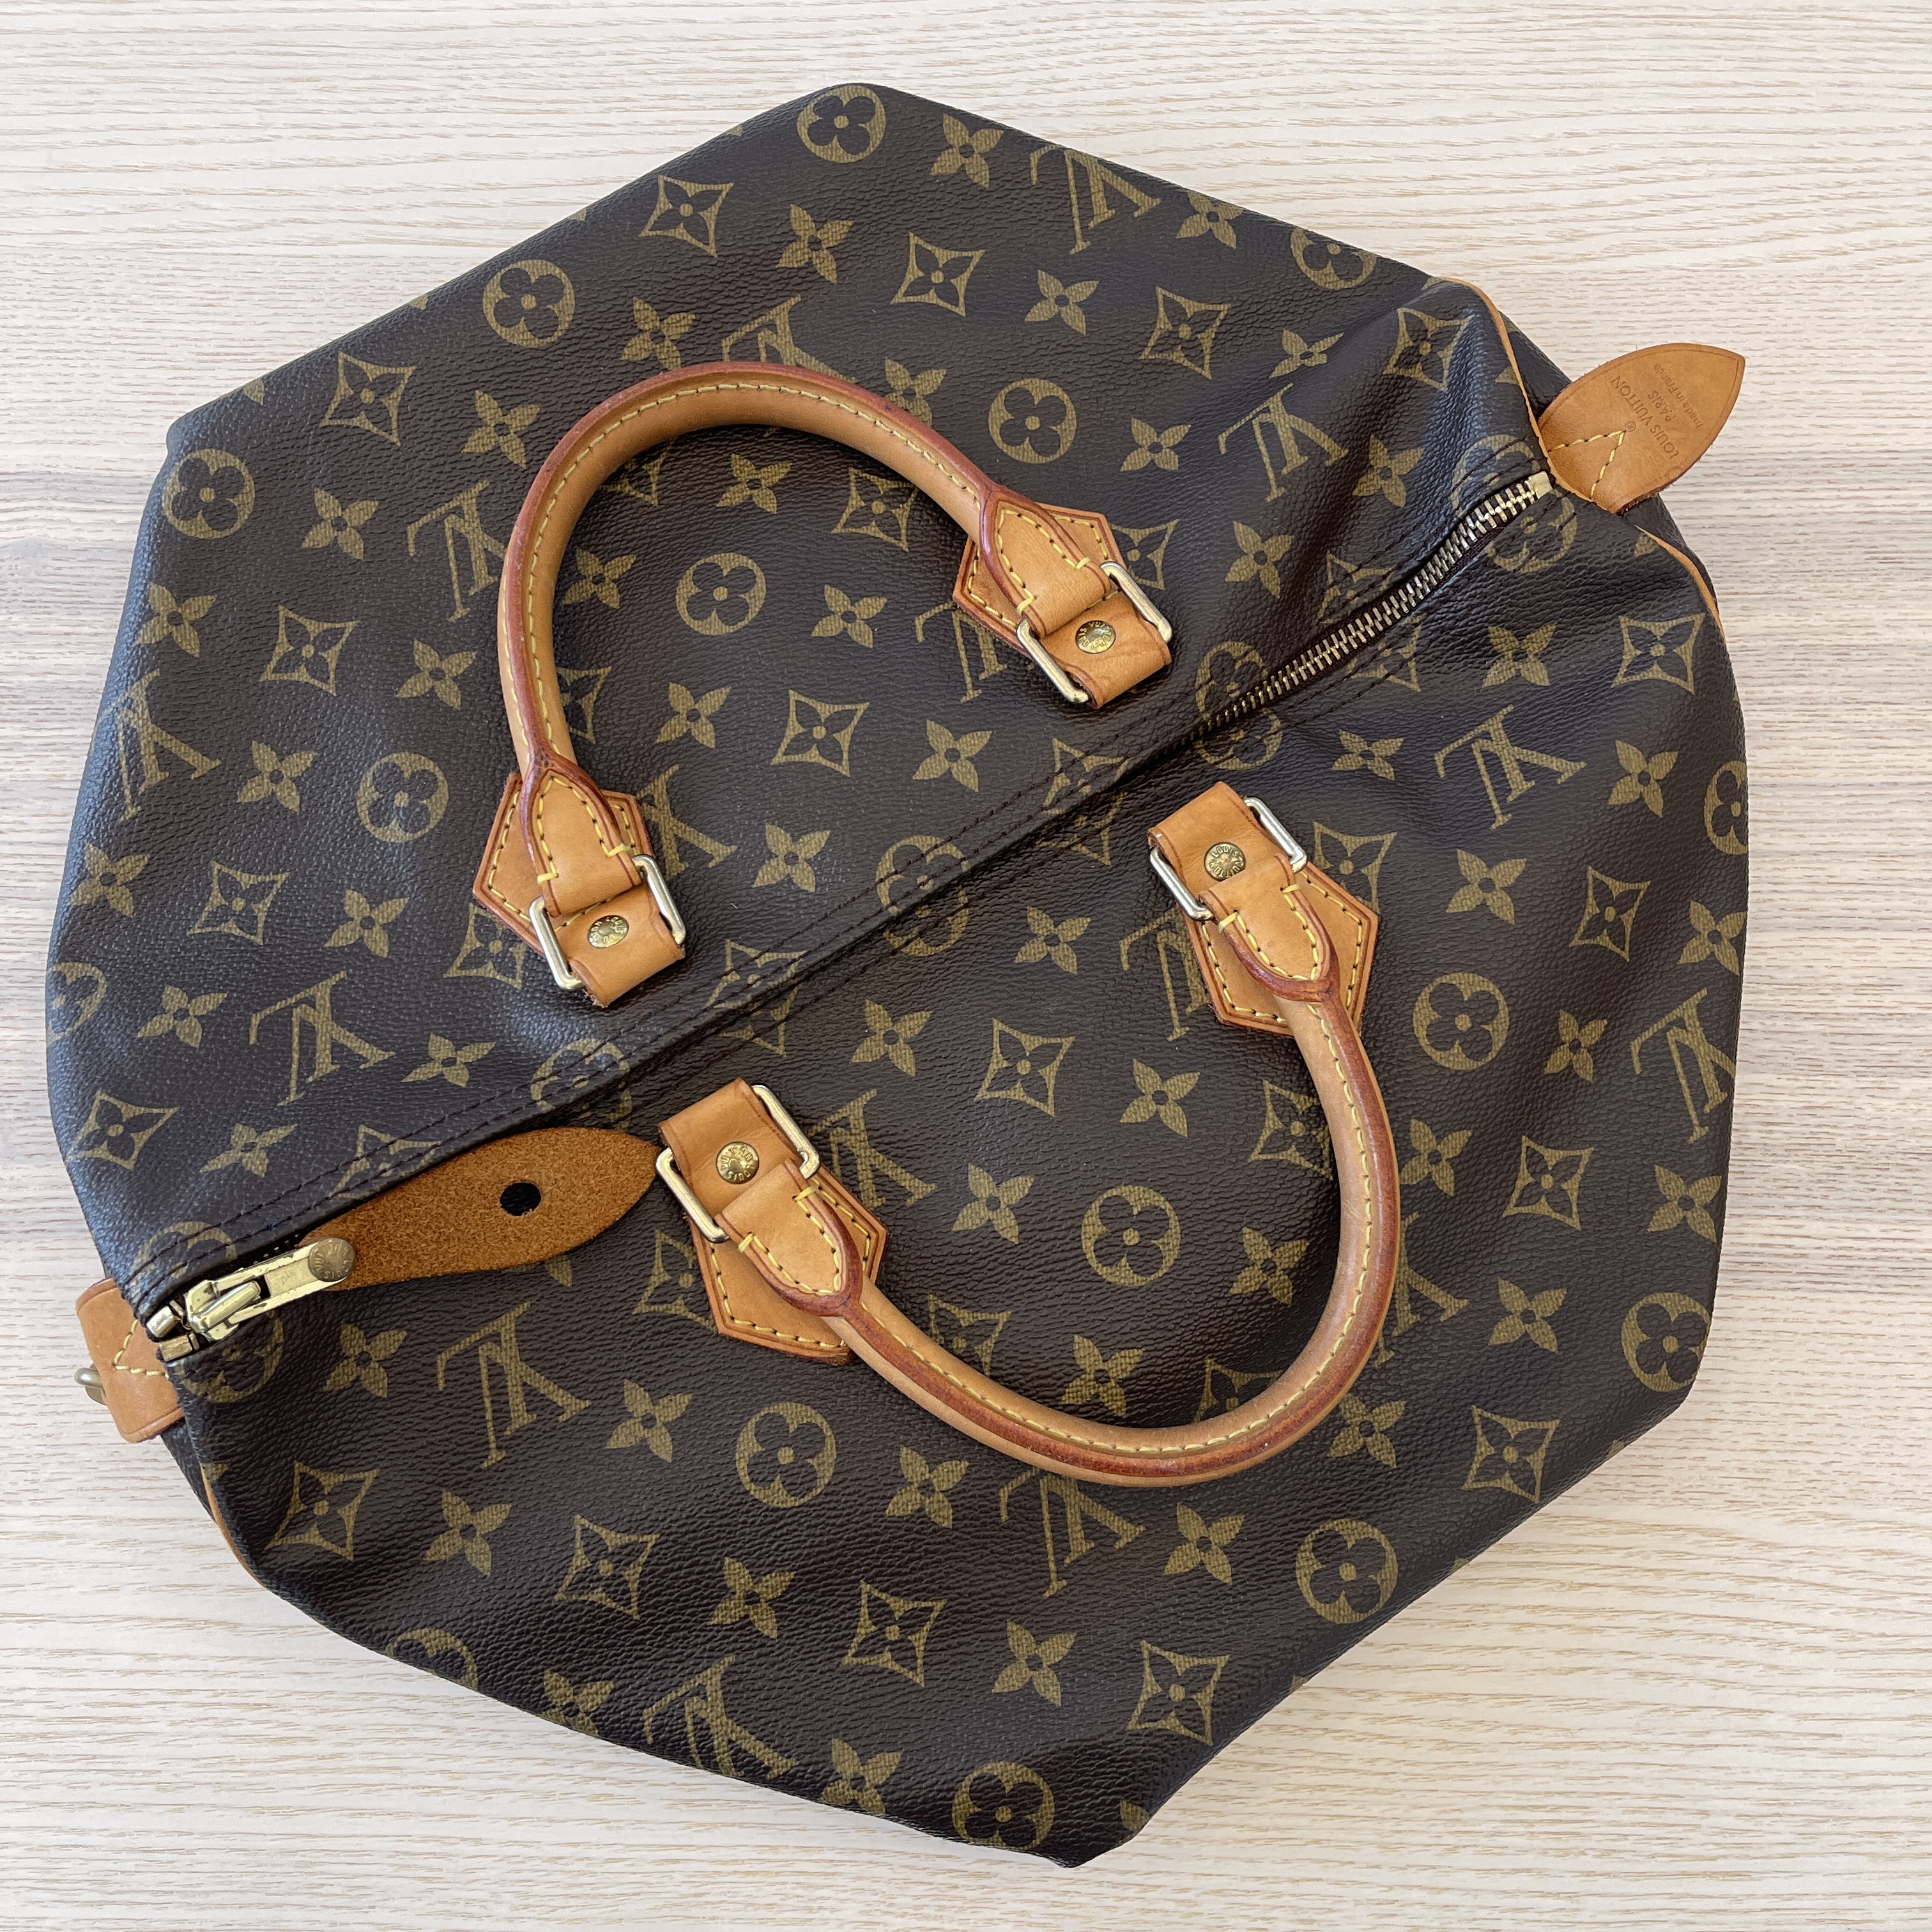 Price: $472 Authentic Louis Vuitton Monogram Speedy 35 Bag Made in France  Date Code/Serial Number SD3180 In exc…